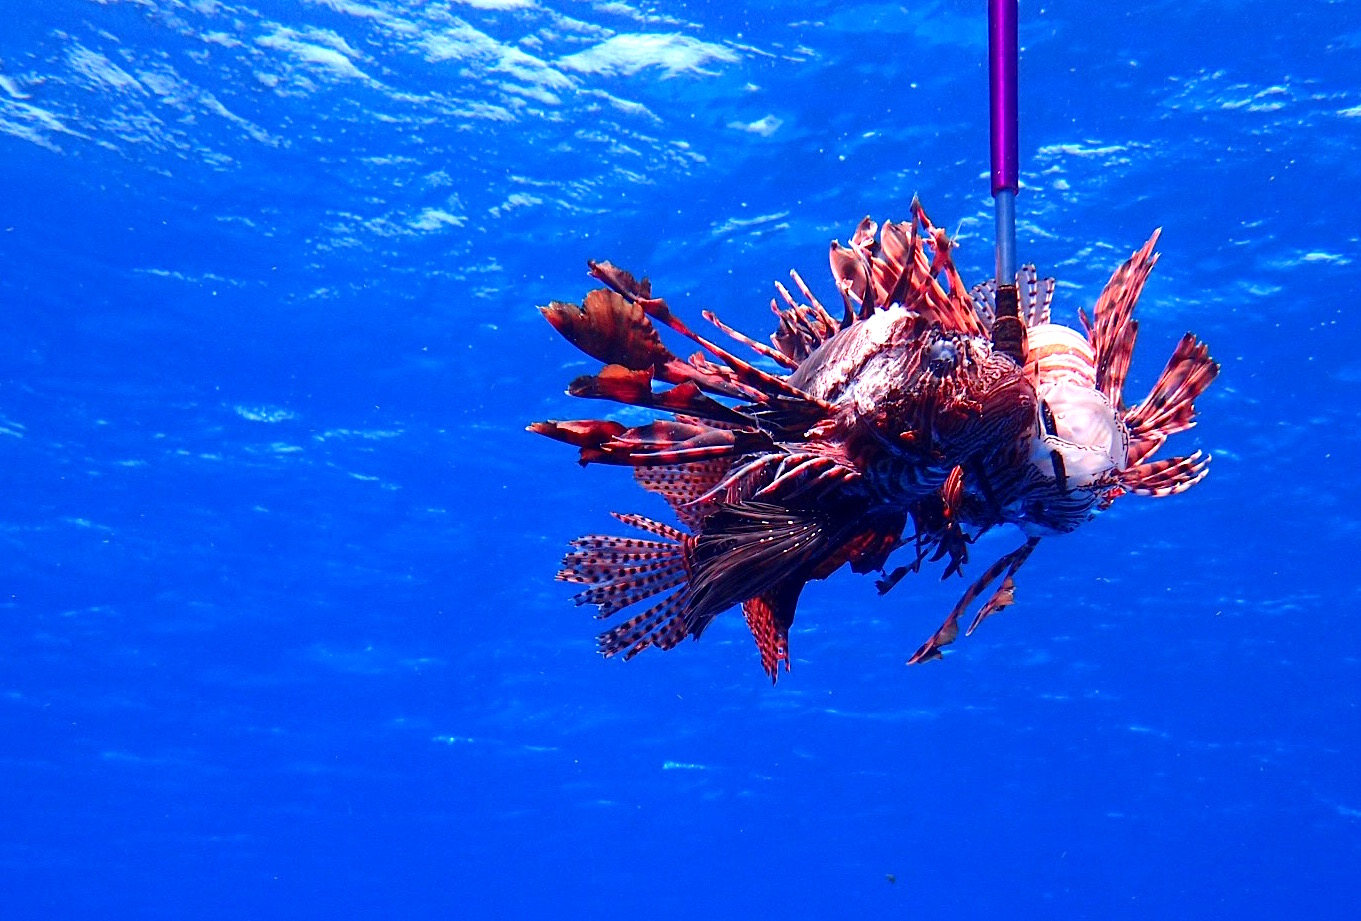 Lionfish on a Hawaiian sling fishing spear in the blue water of Cozumel. Photo by author.